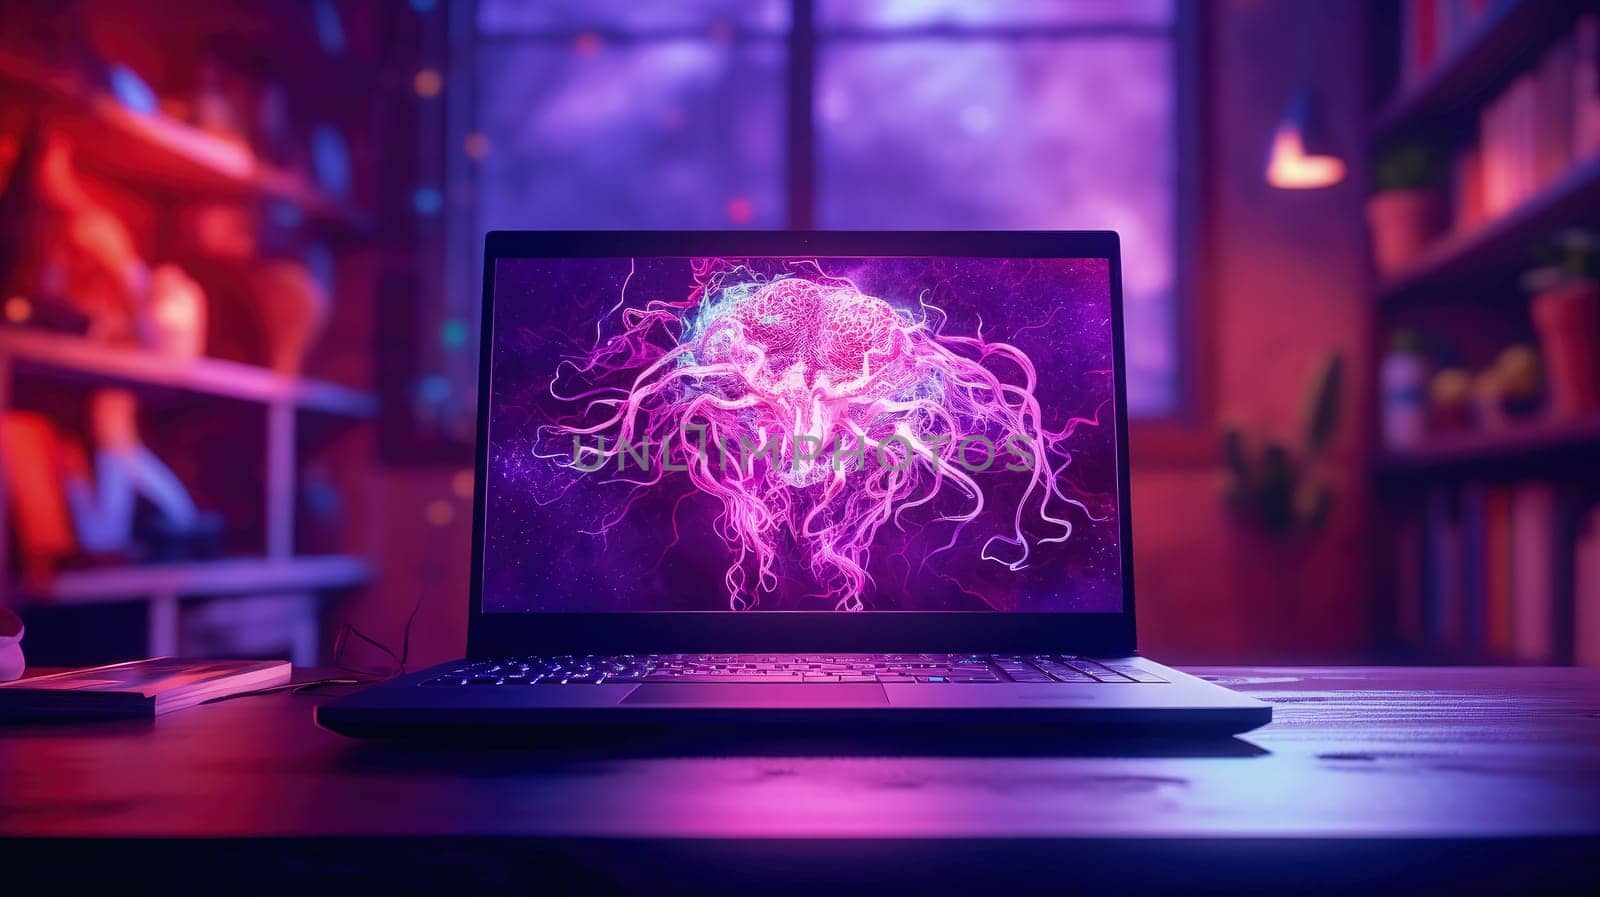 Neurons on a laptop screen in a purple neon room. The concept of artificial intelligence development. by Yurich32